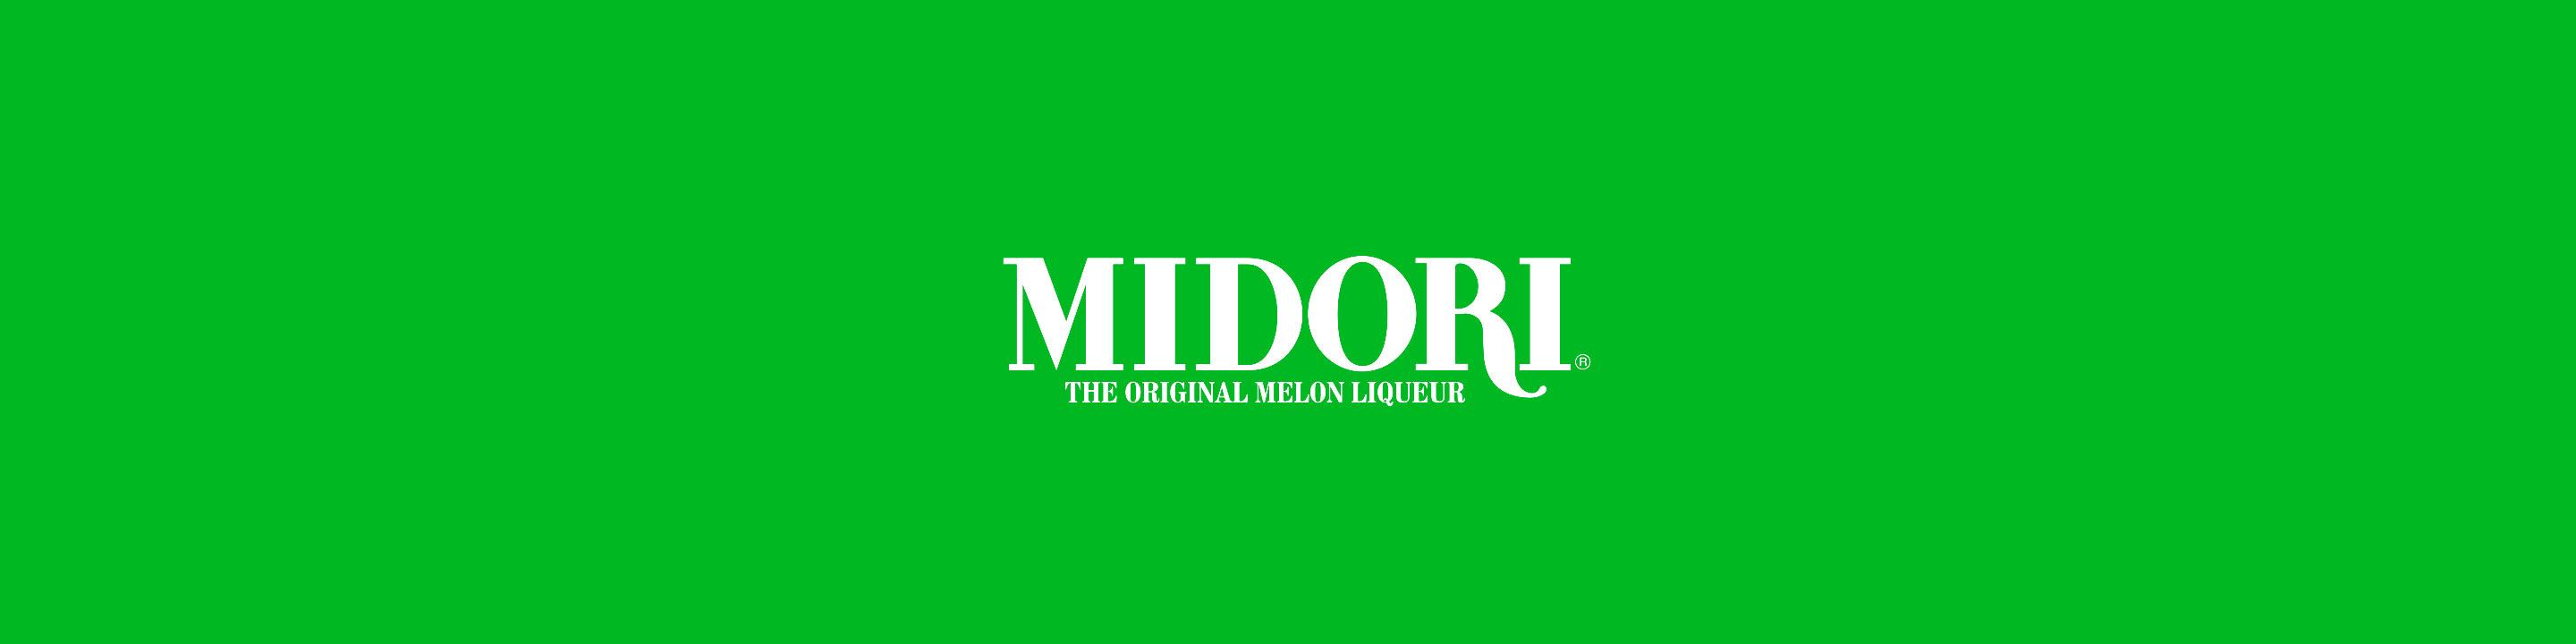 MIDORI® is the original melon liqueur enhanced by premium Japanese musk melons. Its bright green color is distinctive, but the pleasantly sweet liqueur offers great versatility for cocktails, especially those paired with citrus and other fruits. 

Buy Midori online now from nearby liquor stores via Minibar Delivery. 